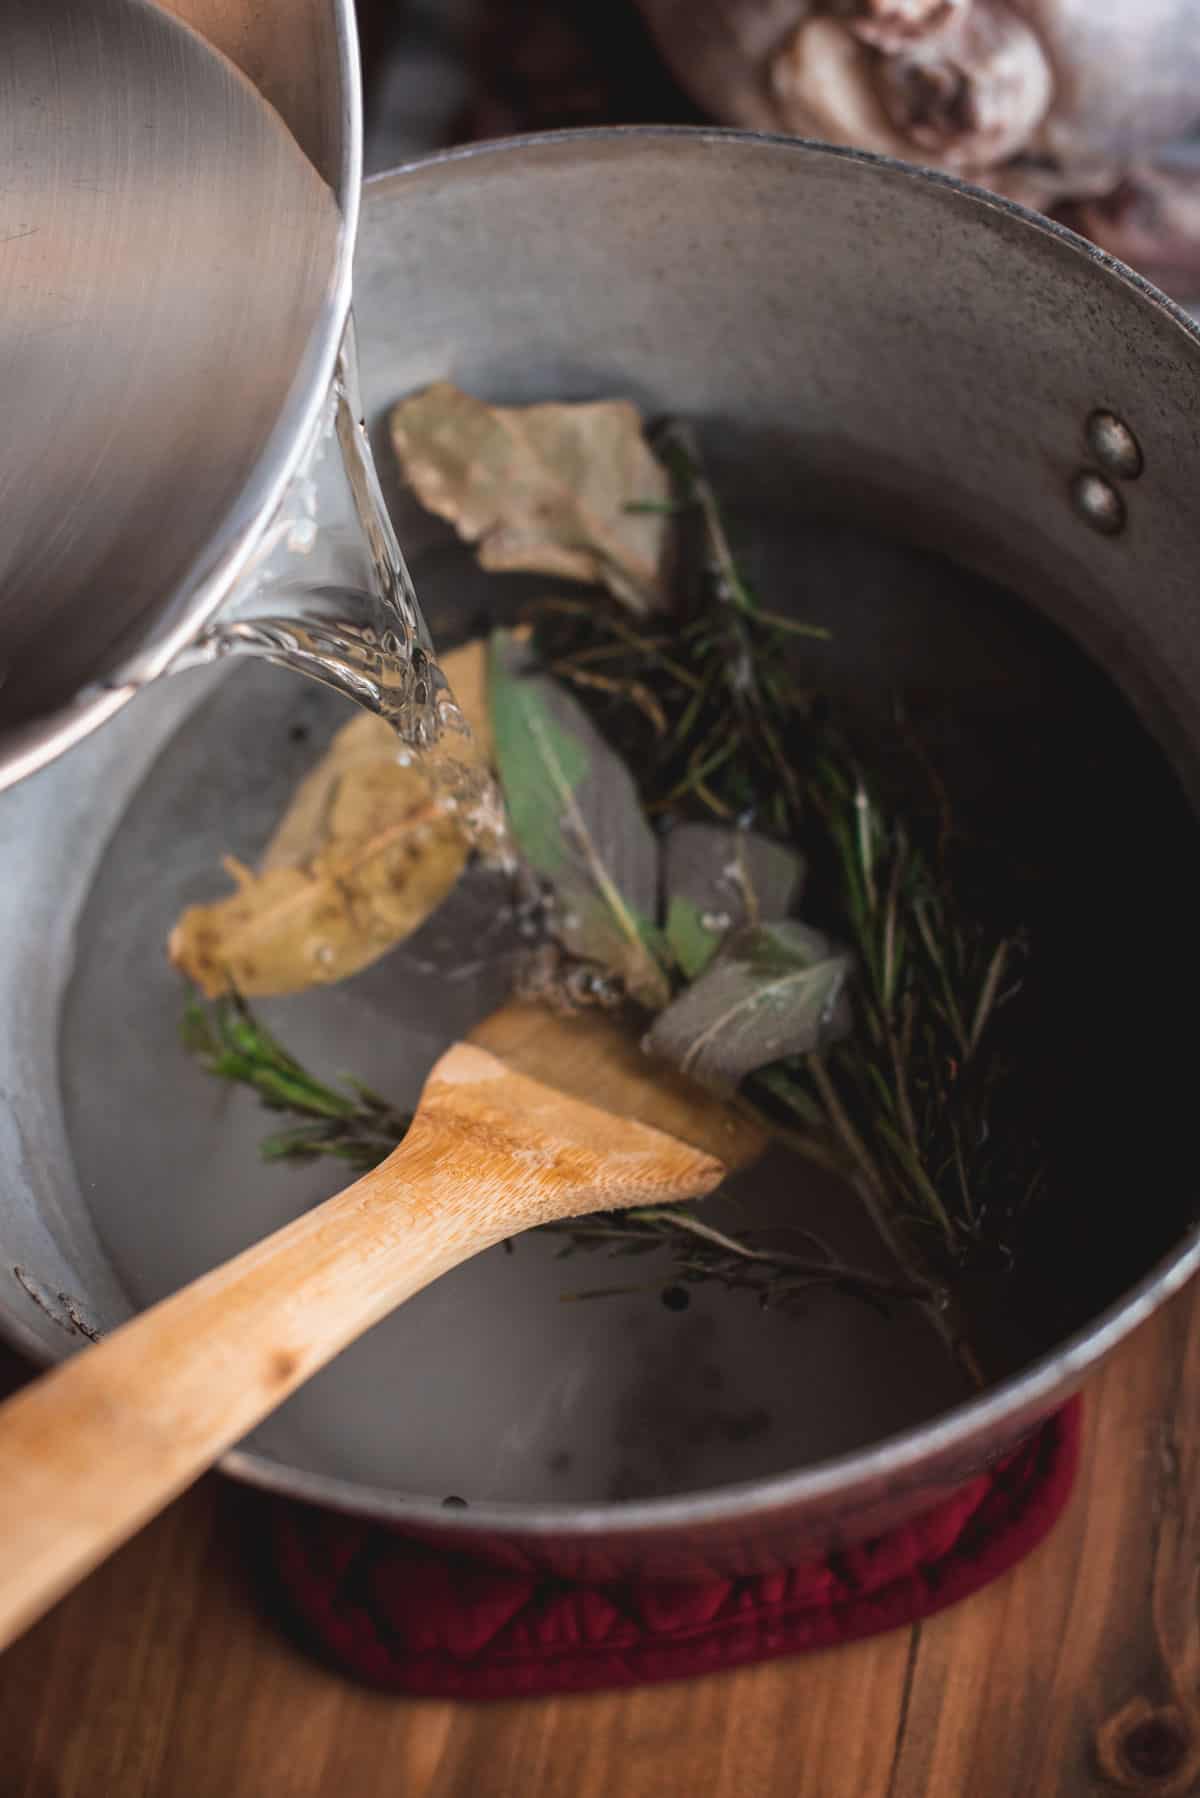 Someone is pouring water into the silver stock pot with the herbs. A wooden spoon is being used to stir them.